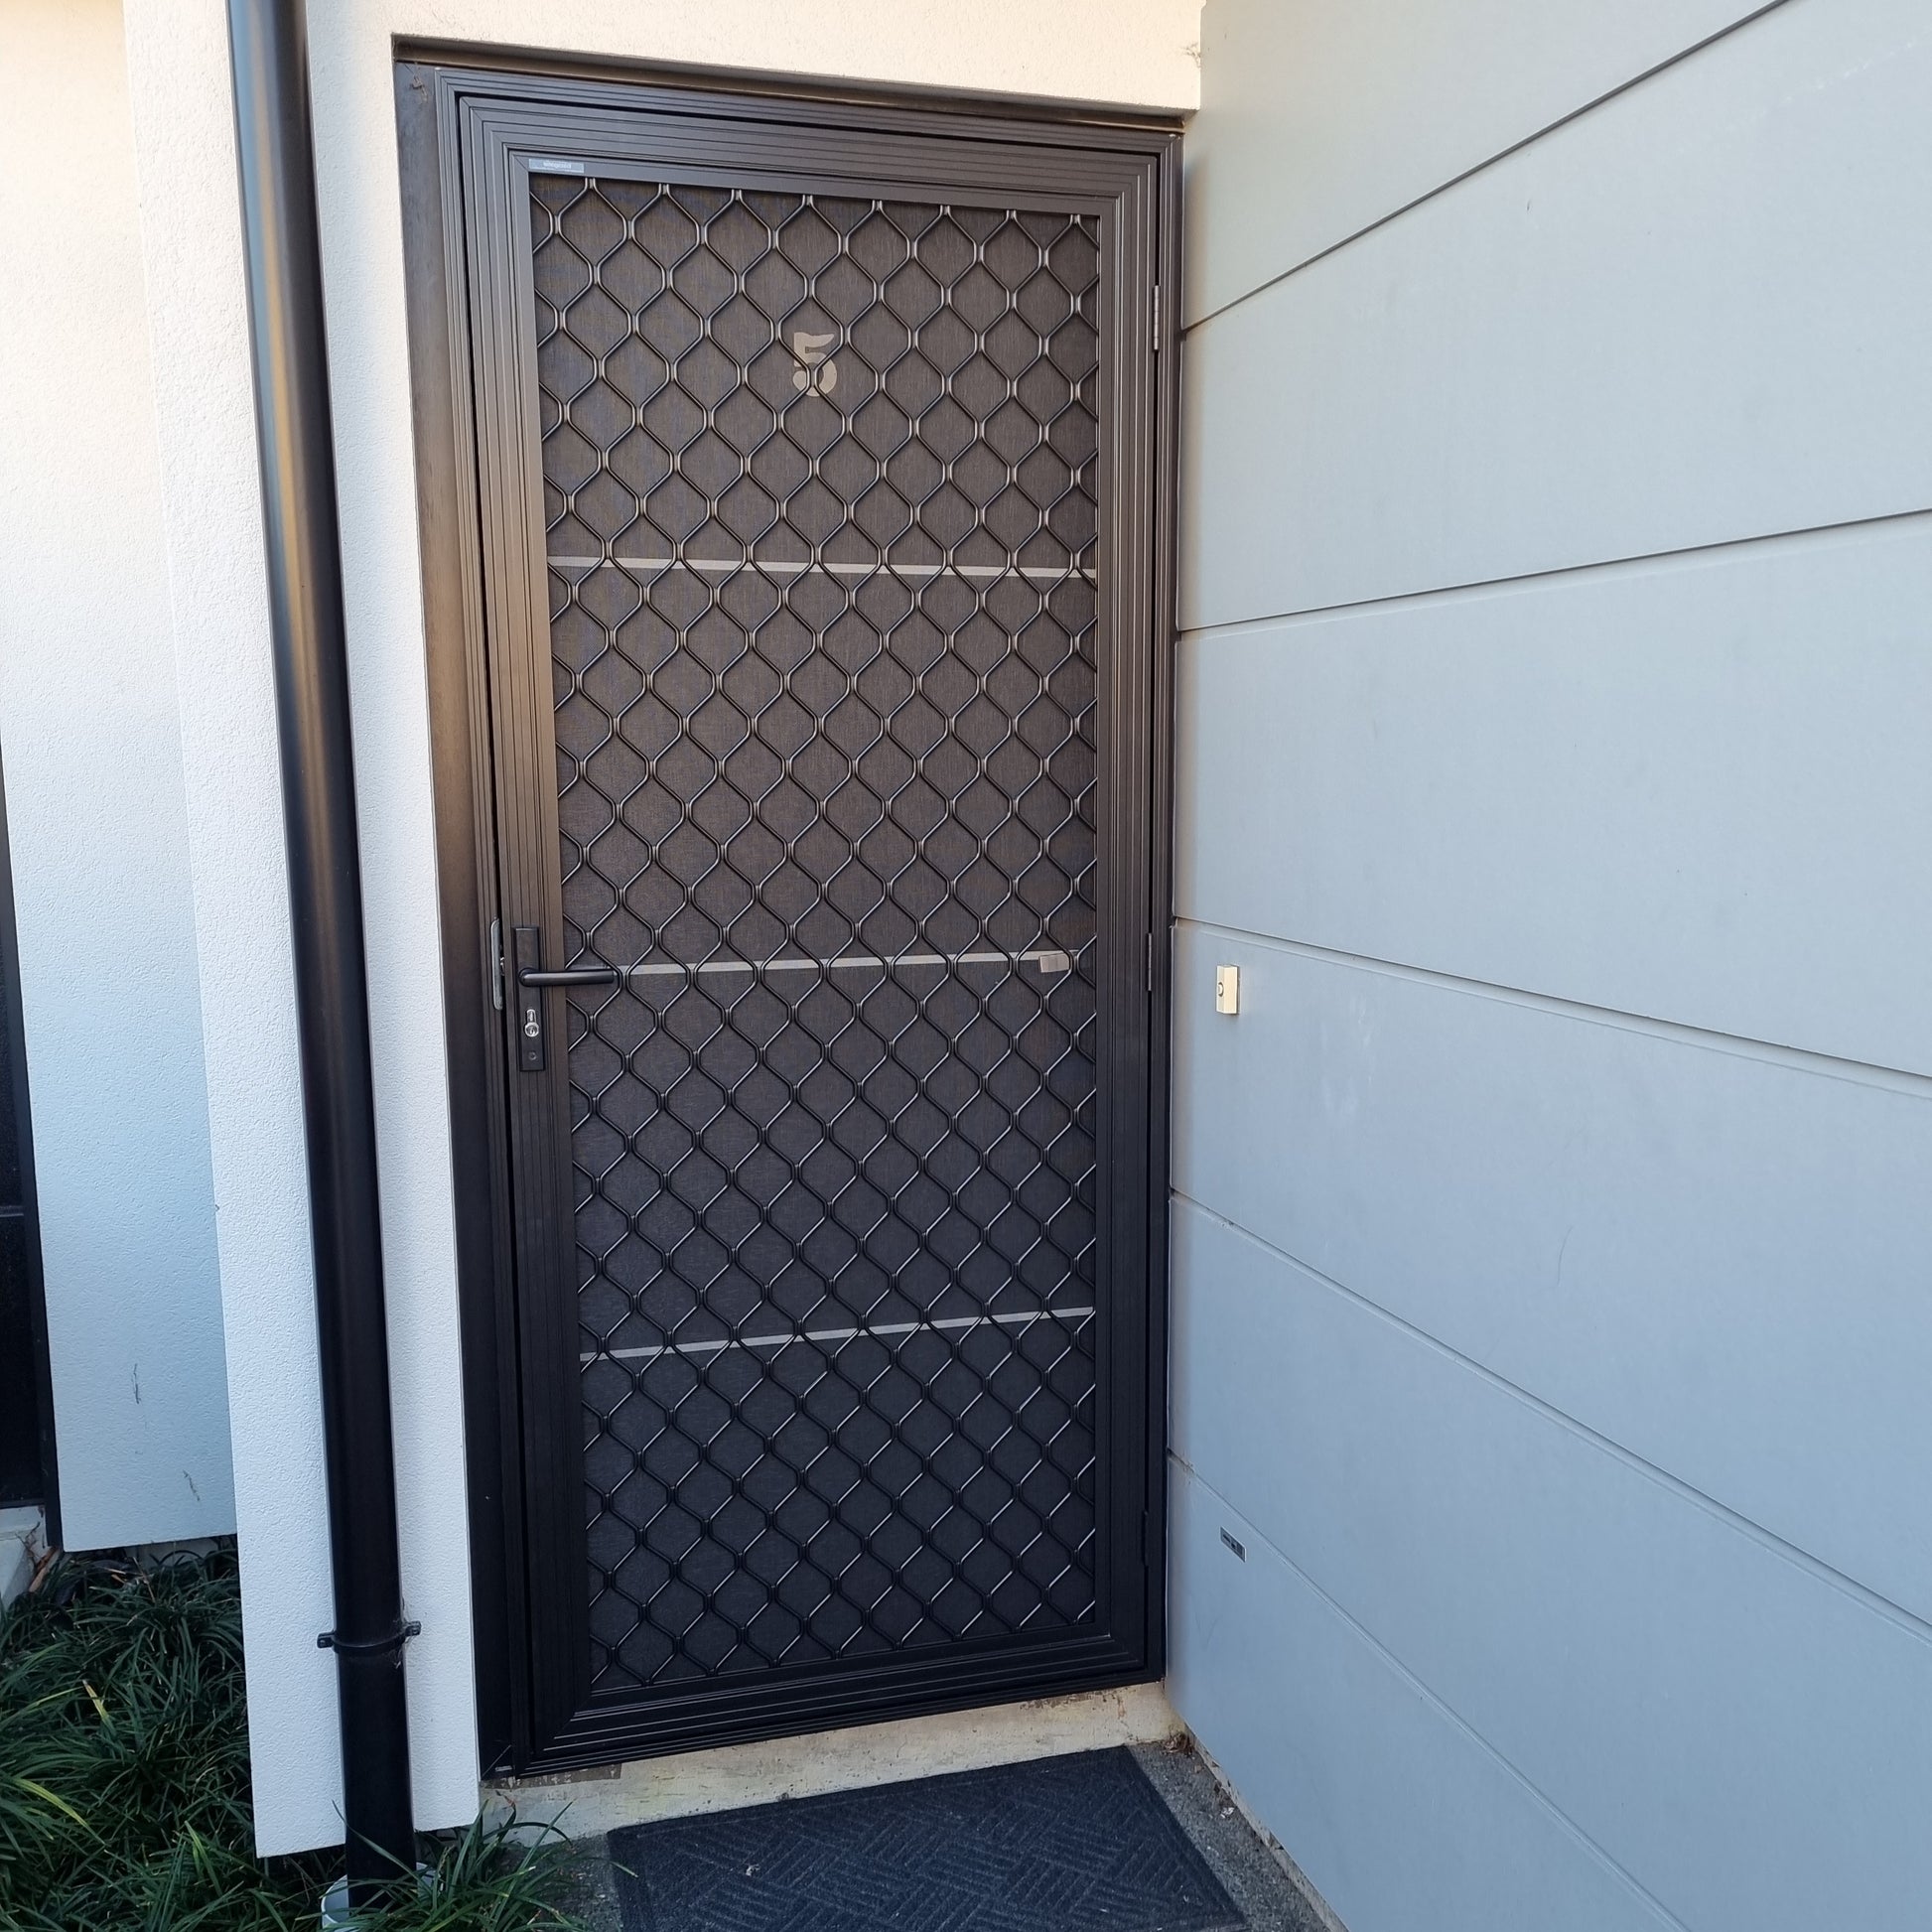 Grilled Security Doors and Windows